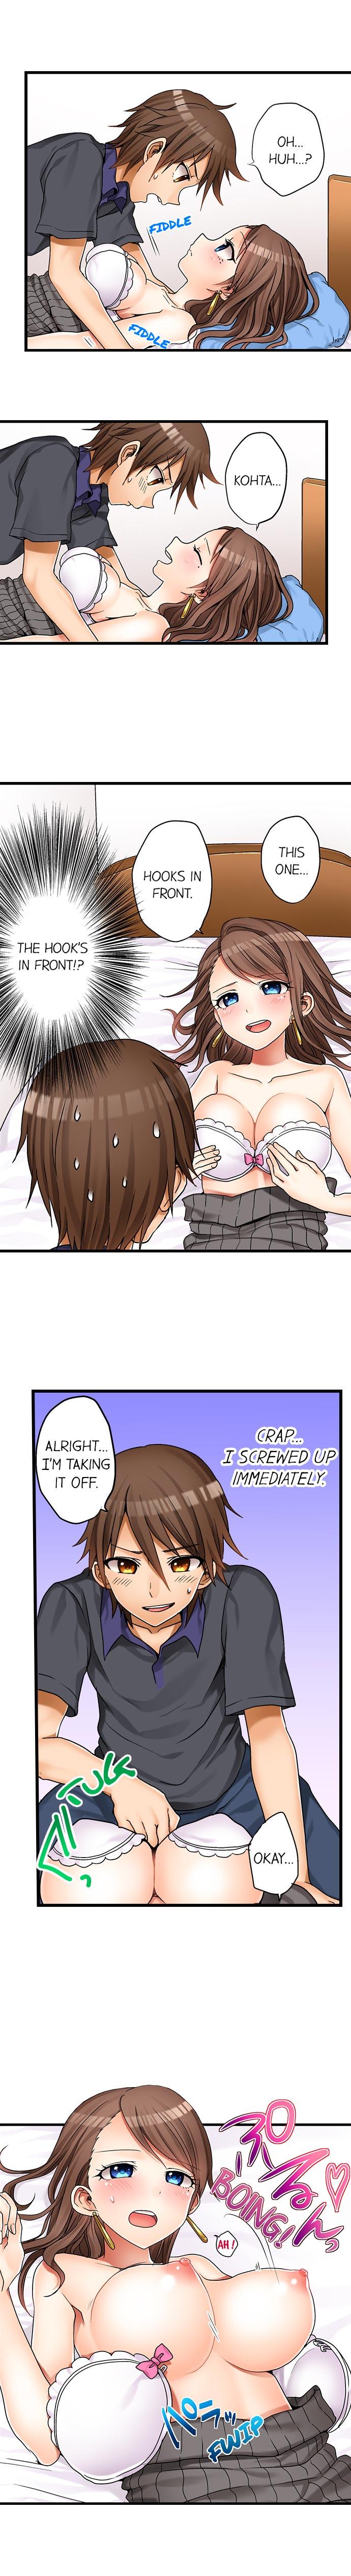 Exposed My First Time is with.... My Little Sister?! - Original Lesbians - Page 3